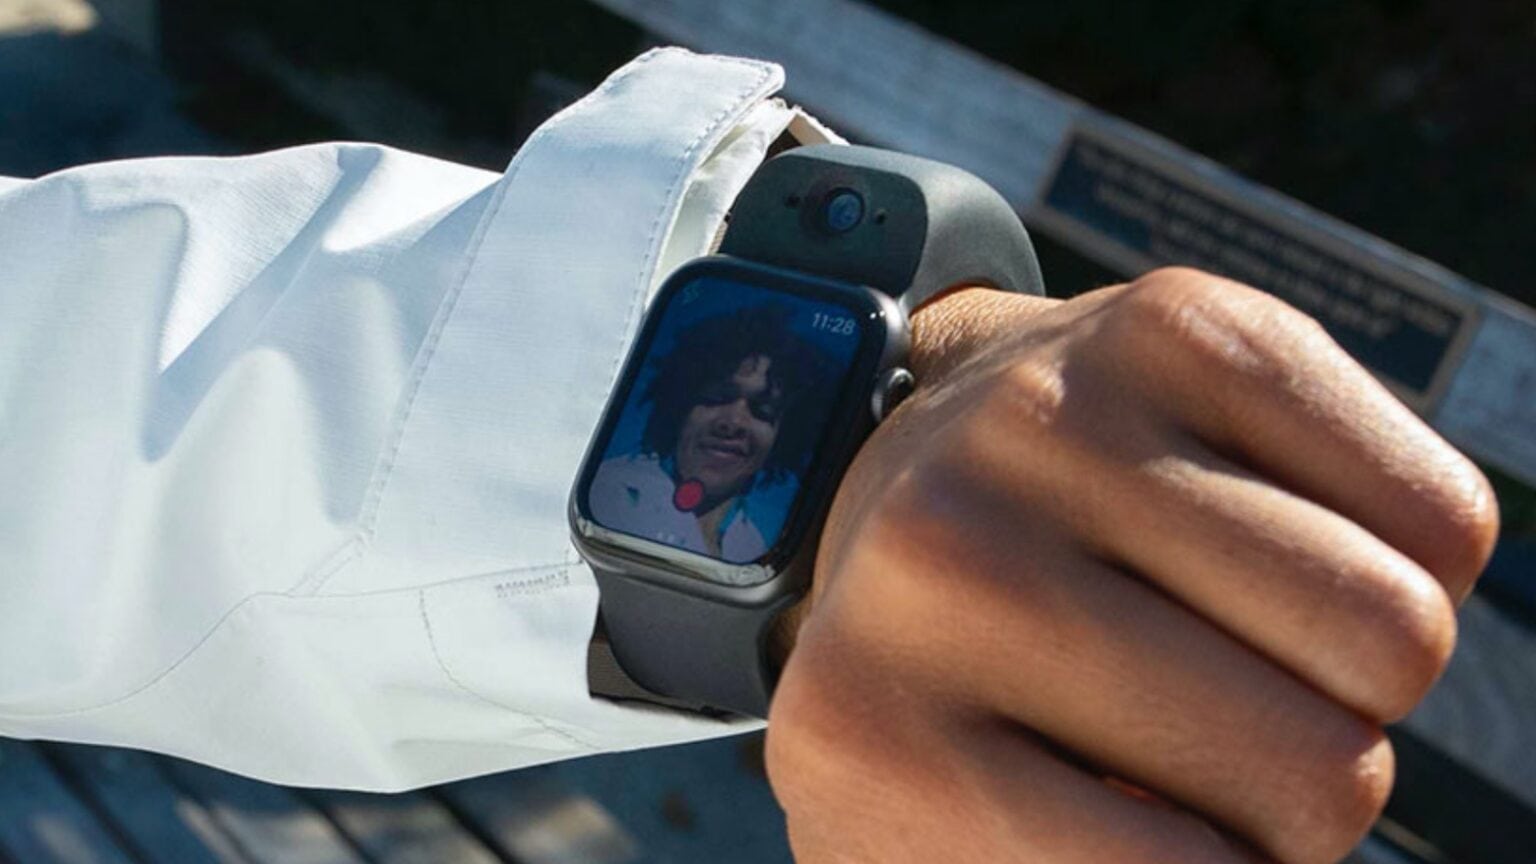 Many people would like an Apple Watch camera, but not one as large as the Wristcam.